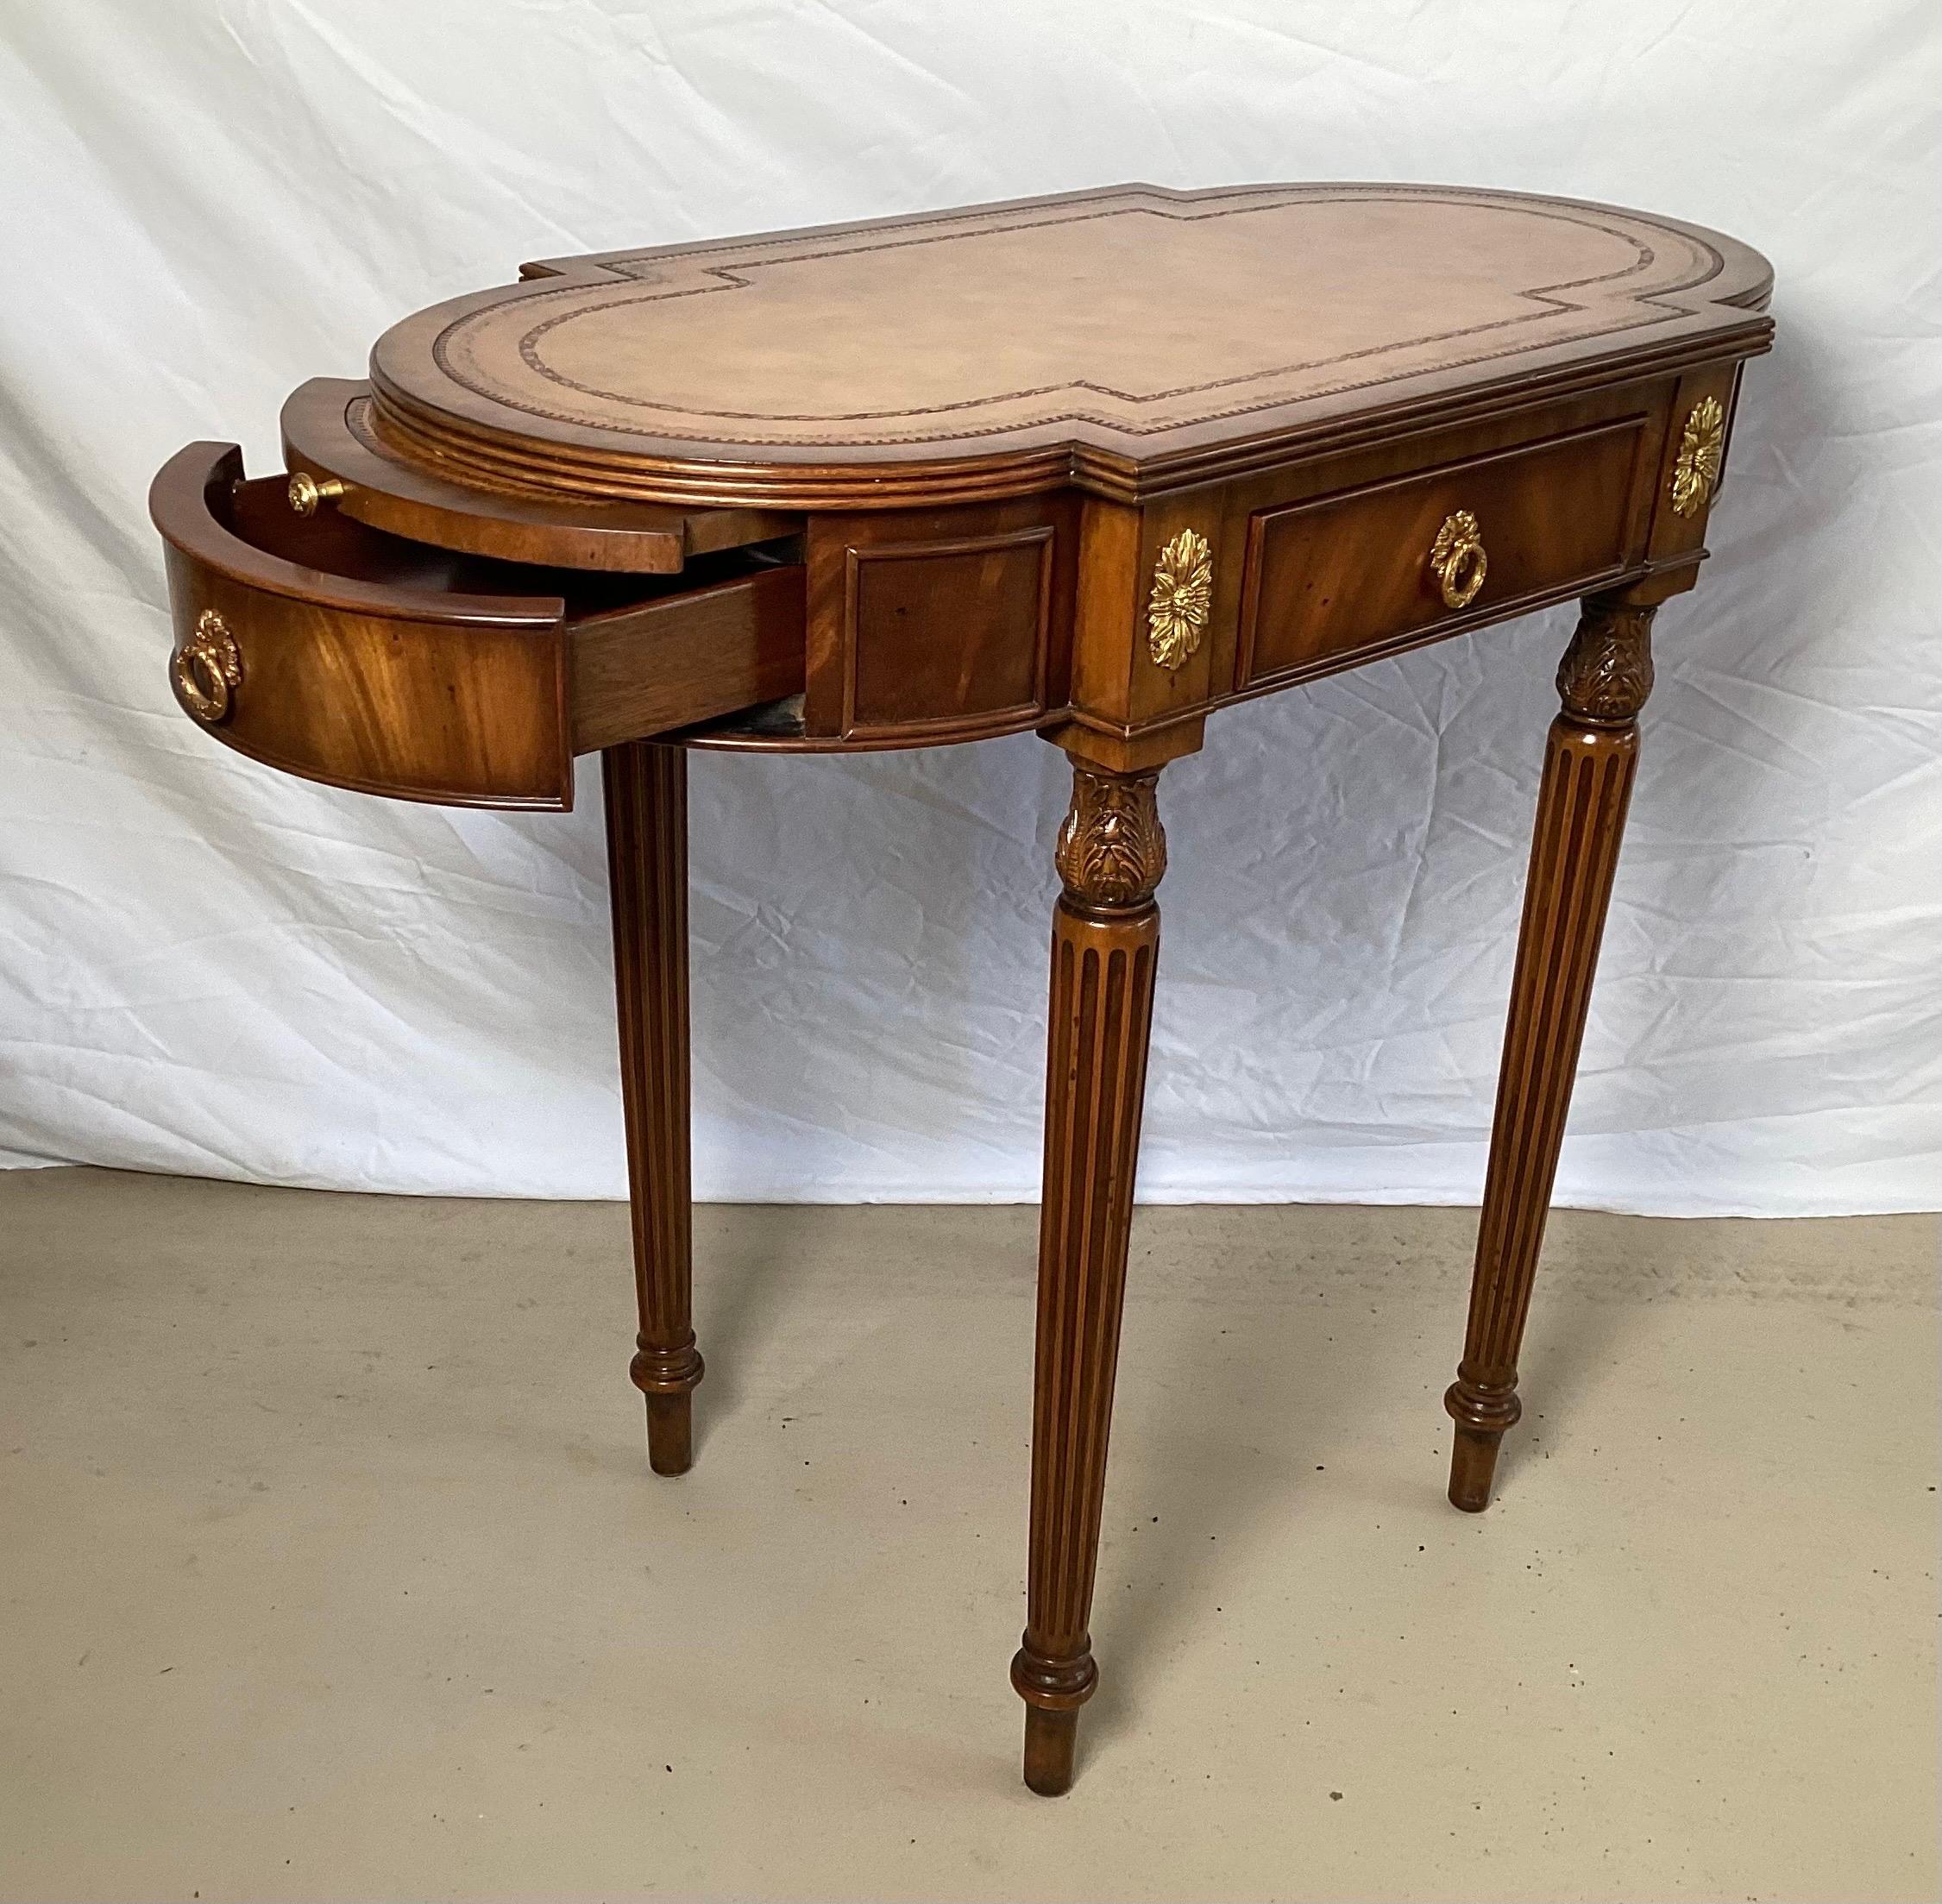 Graceful oval burl walnut and leather topped accent work table by Maitland Smith. The warm walnut and mahogany with a tan tooled leather top with ormolu mounts. The table with three drawers, one on each side and one at the from with two pull out